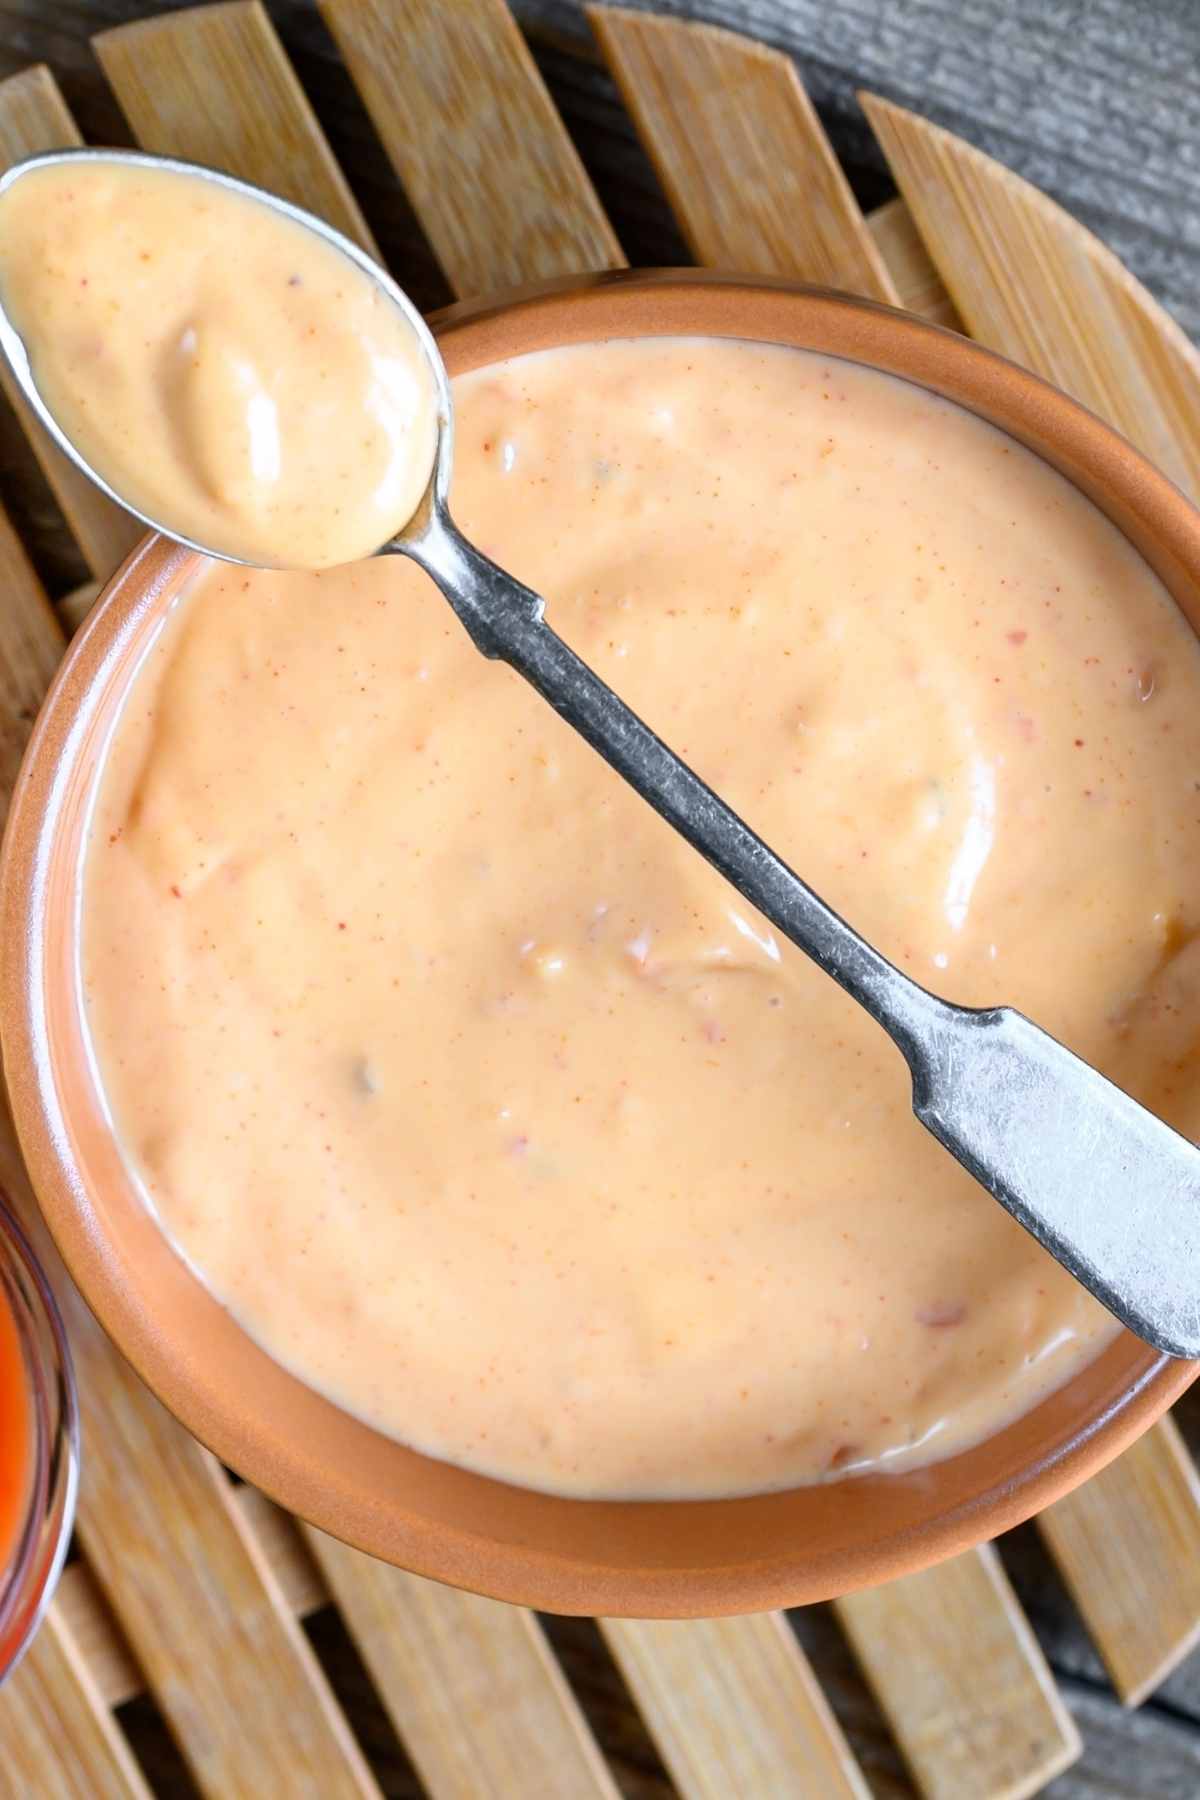 This copycat Cane’s Sauce is tangy, creamy, and full of flavor. It’s great for dipping chicken fingers, fries, or even used as a salad dressing! It rivals the sauce from Raising Cane’s restaurant.